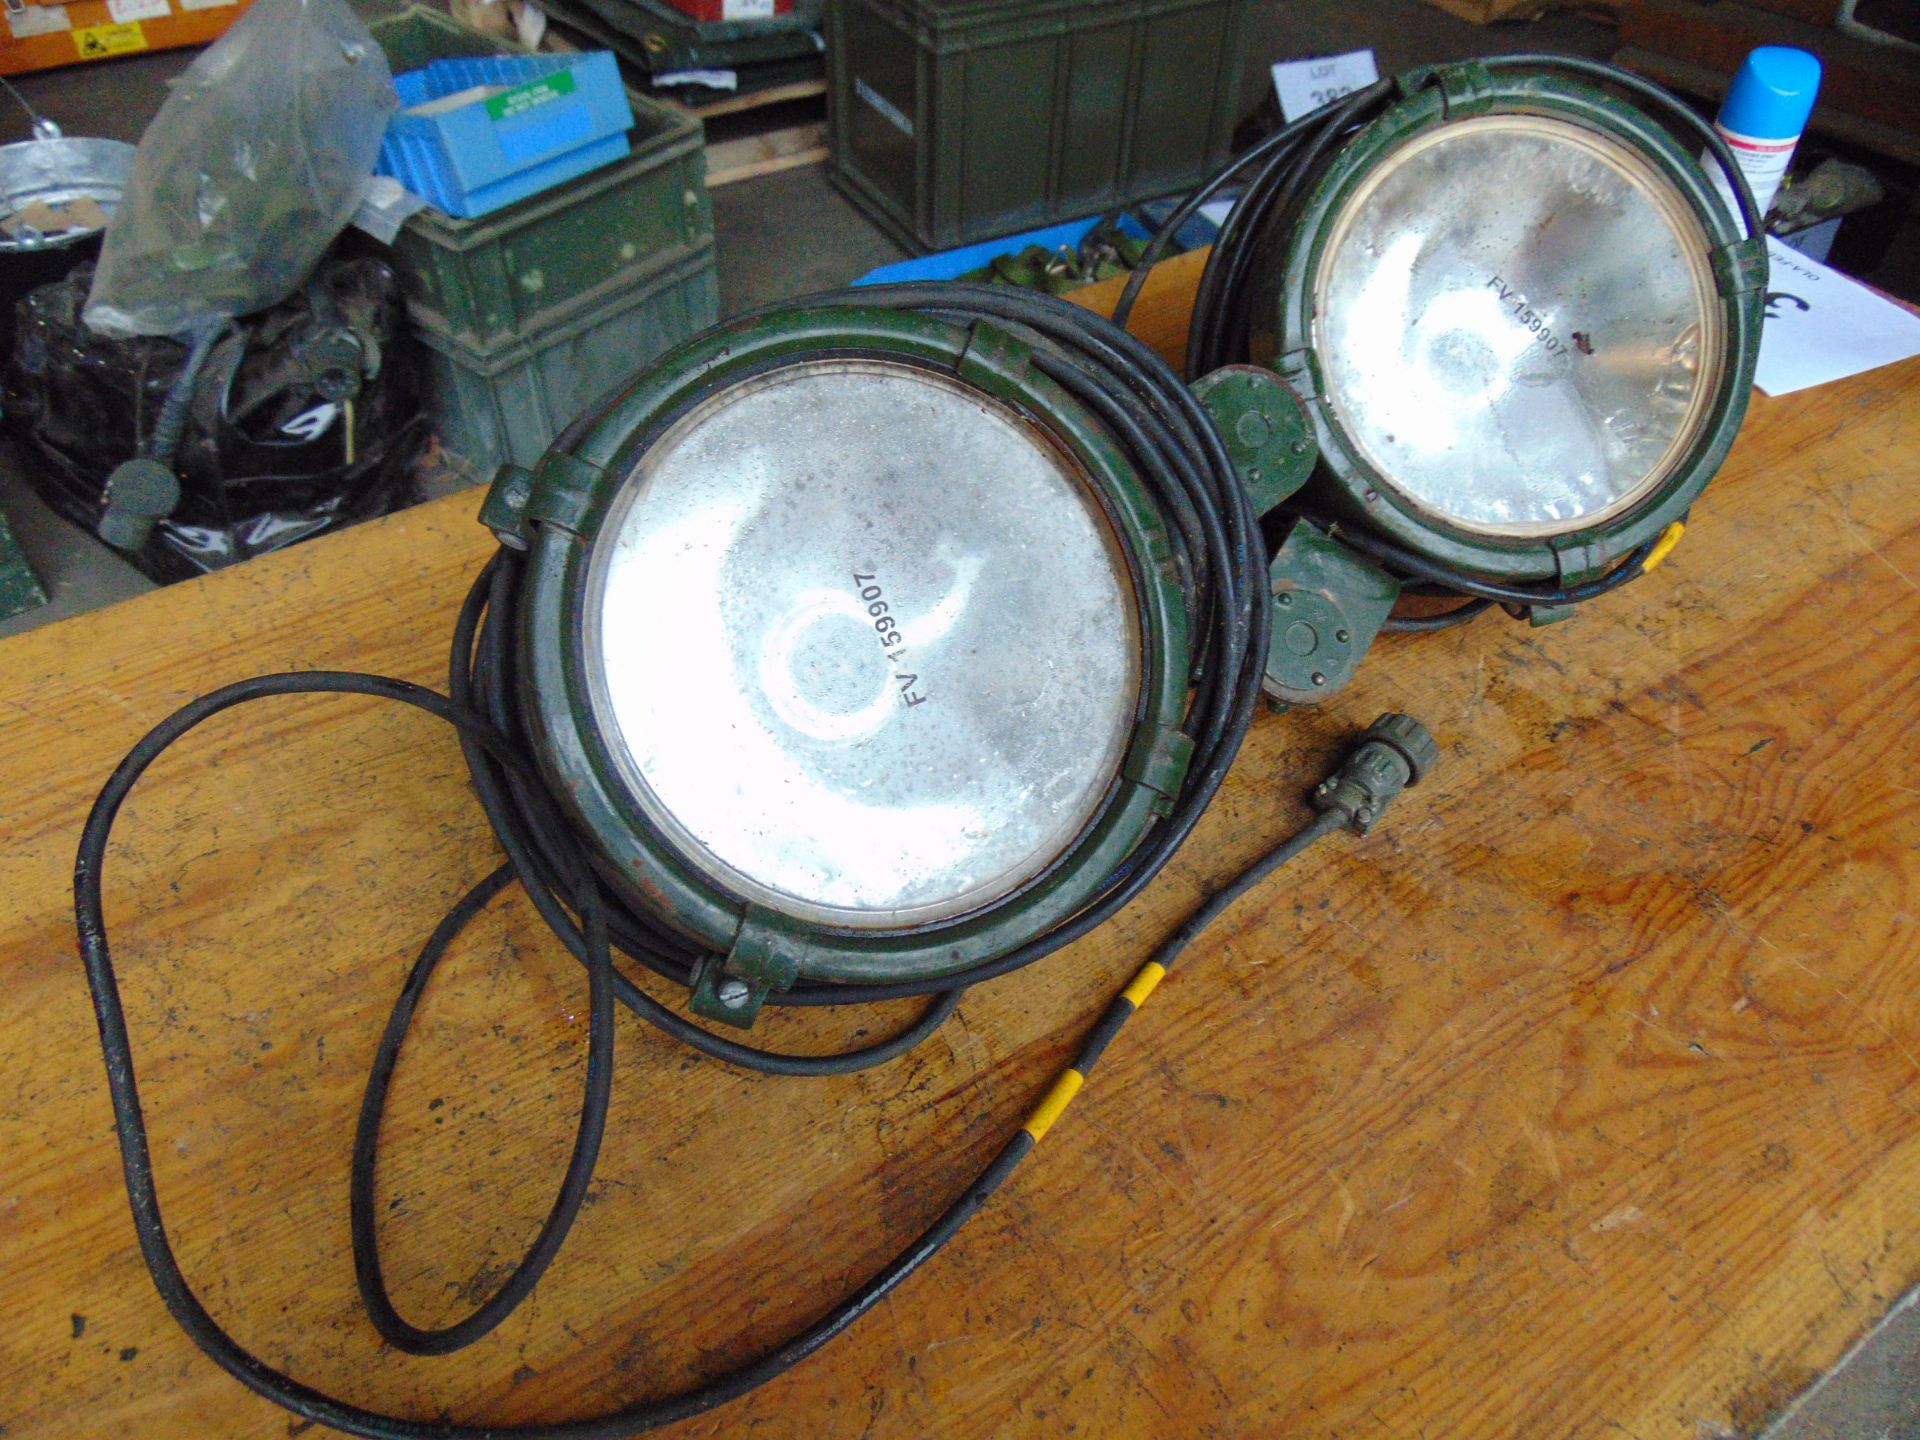 2 x FV159907 Vehicle Spot Lamp c/w Bracket and Leads - Image 3 of 7